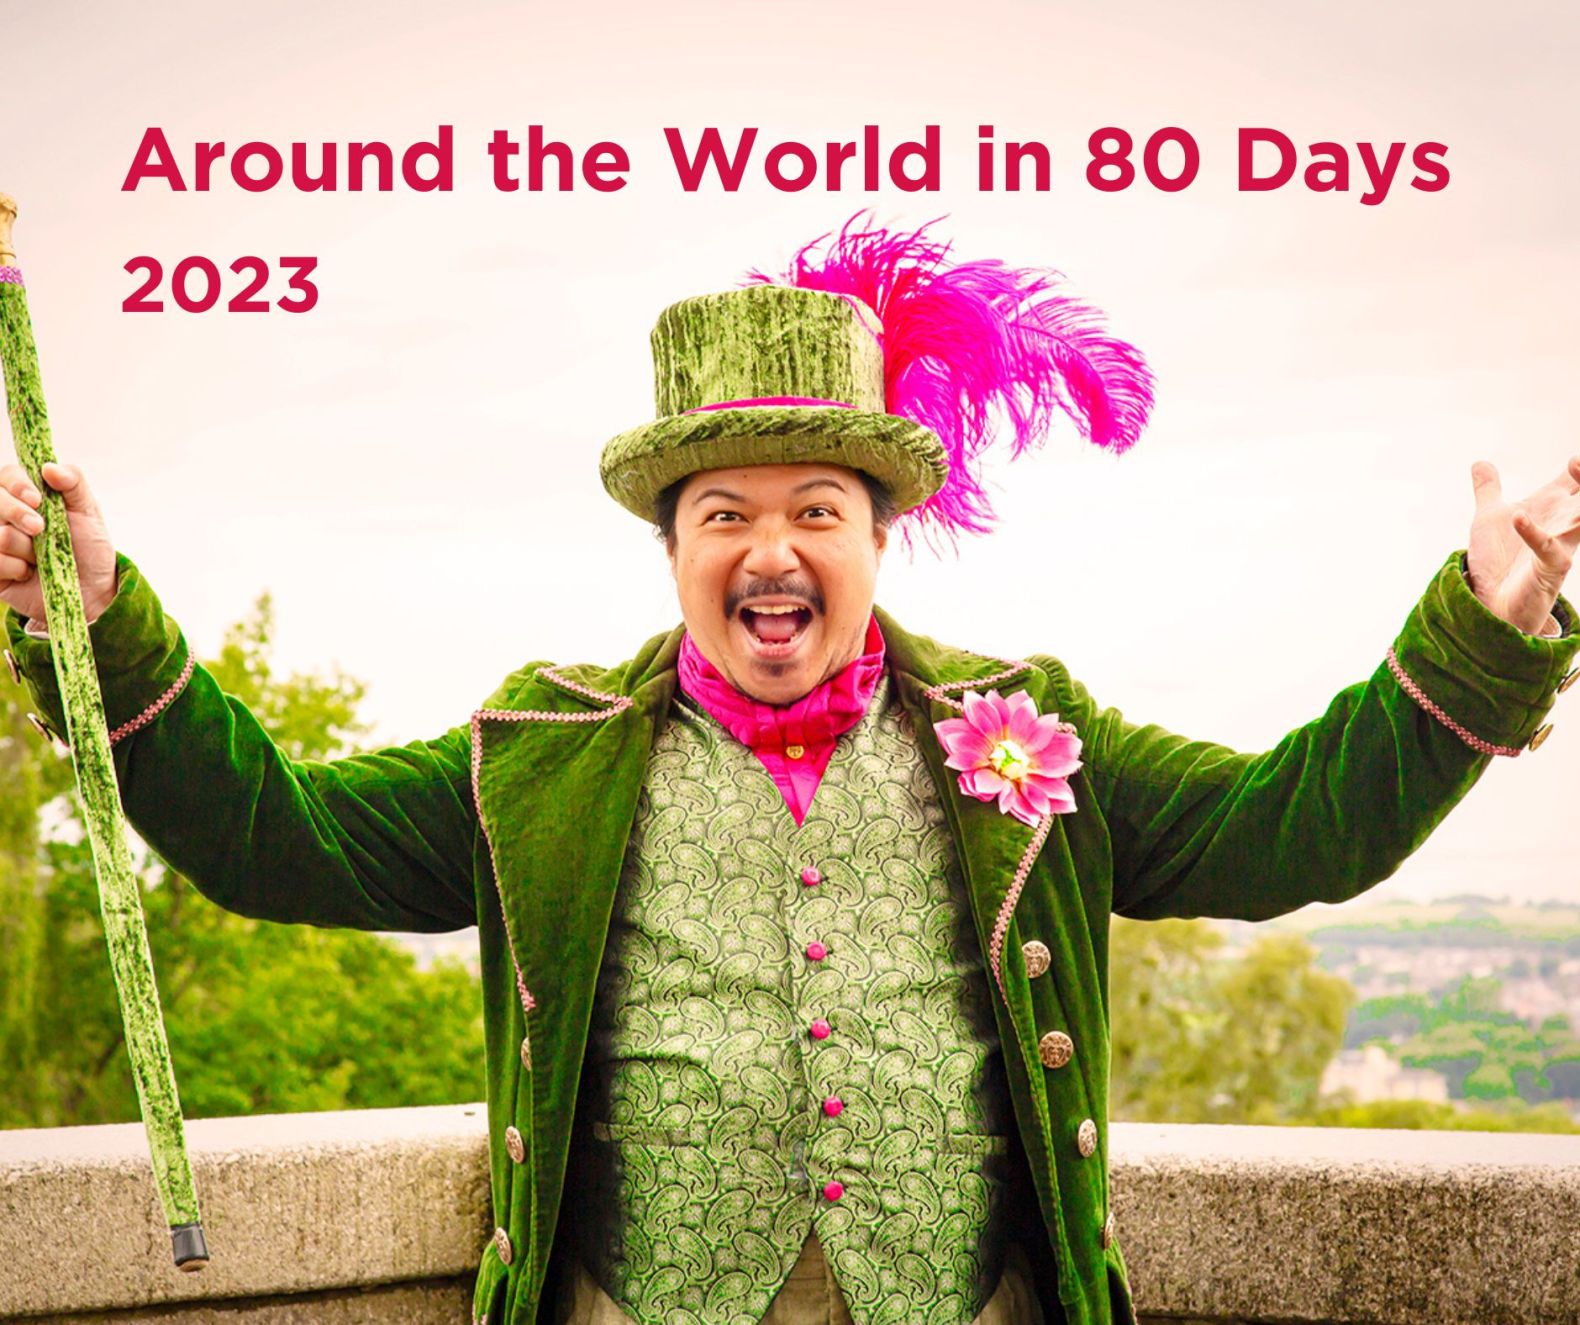 Image of Around the World in 80 Days from 2023